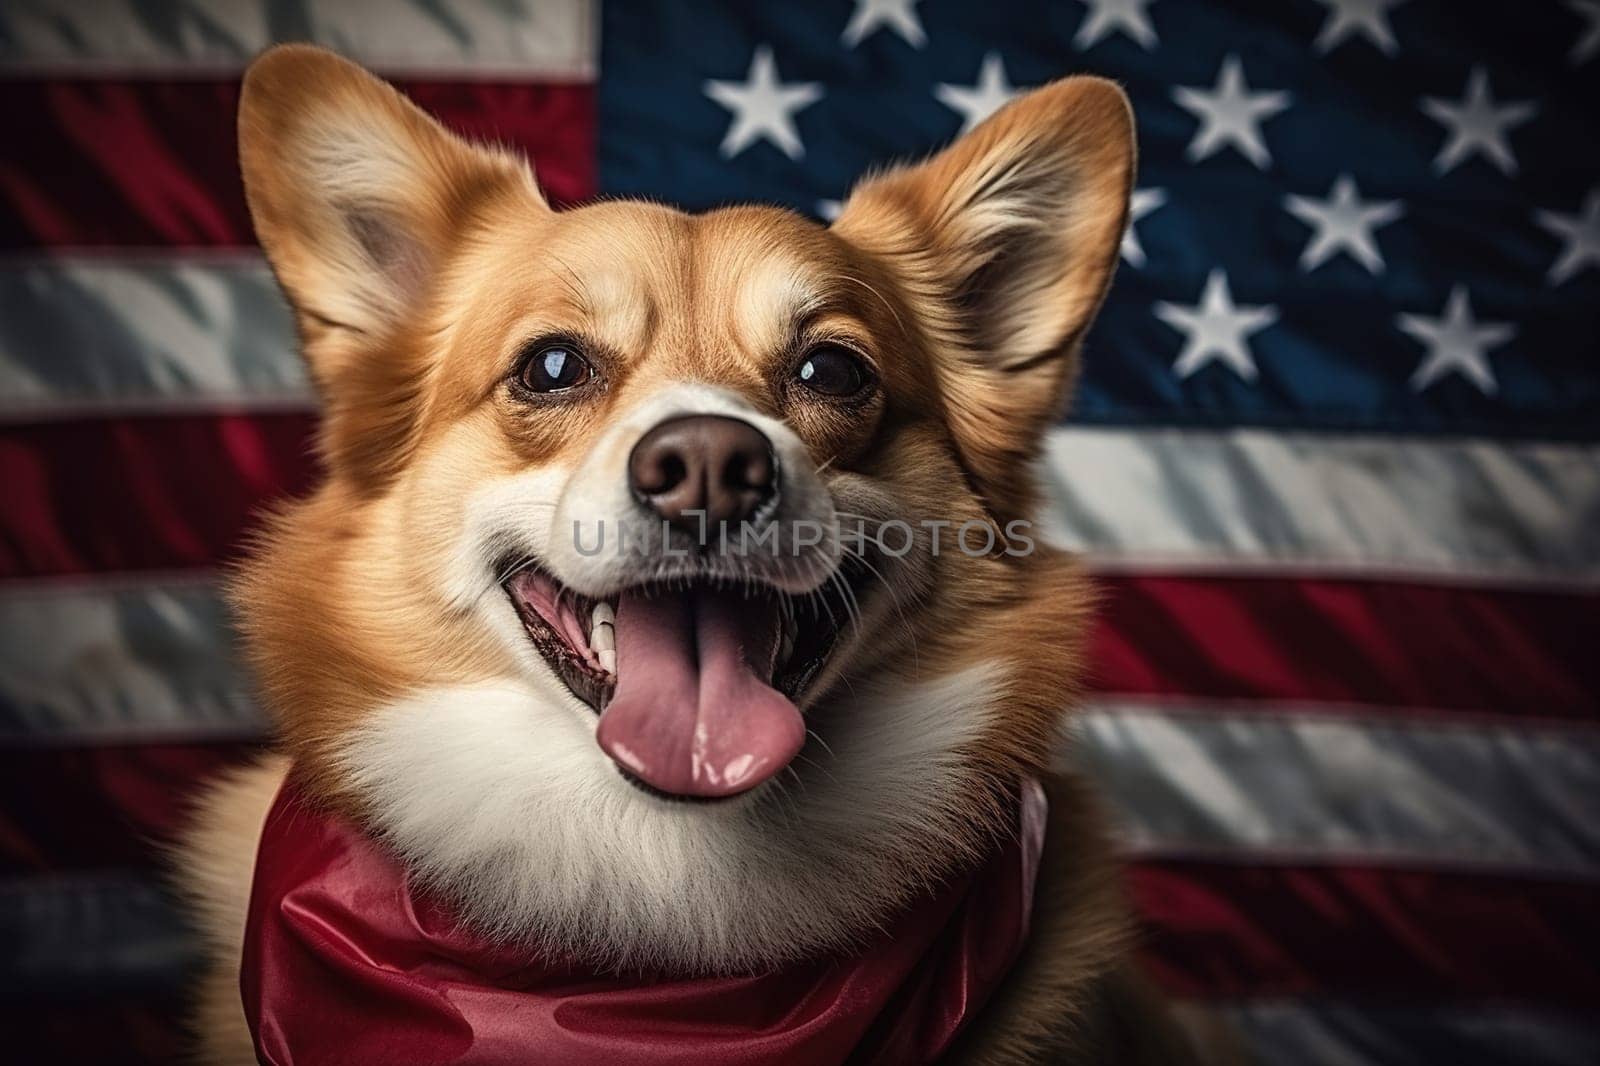 Welsh Corgi dog against the background of the US flag. Elections, US Independence Day. Patriotic dog.